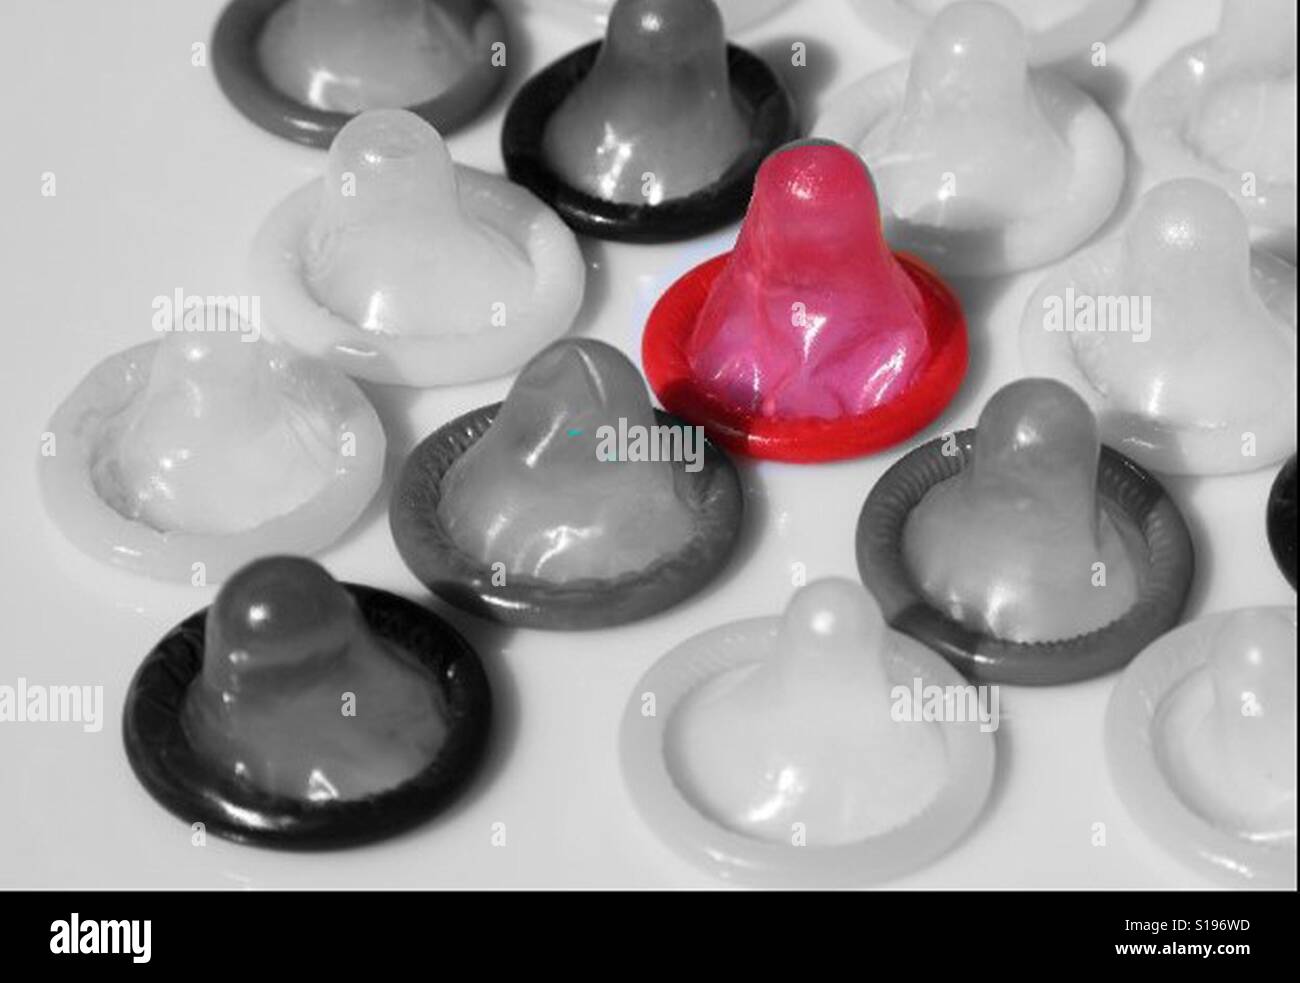 One red condom in a selection of black and white condoms Stock Photo